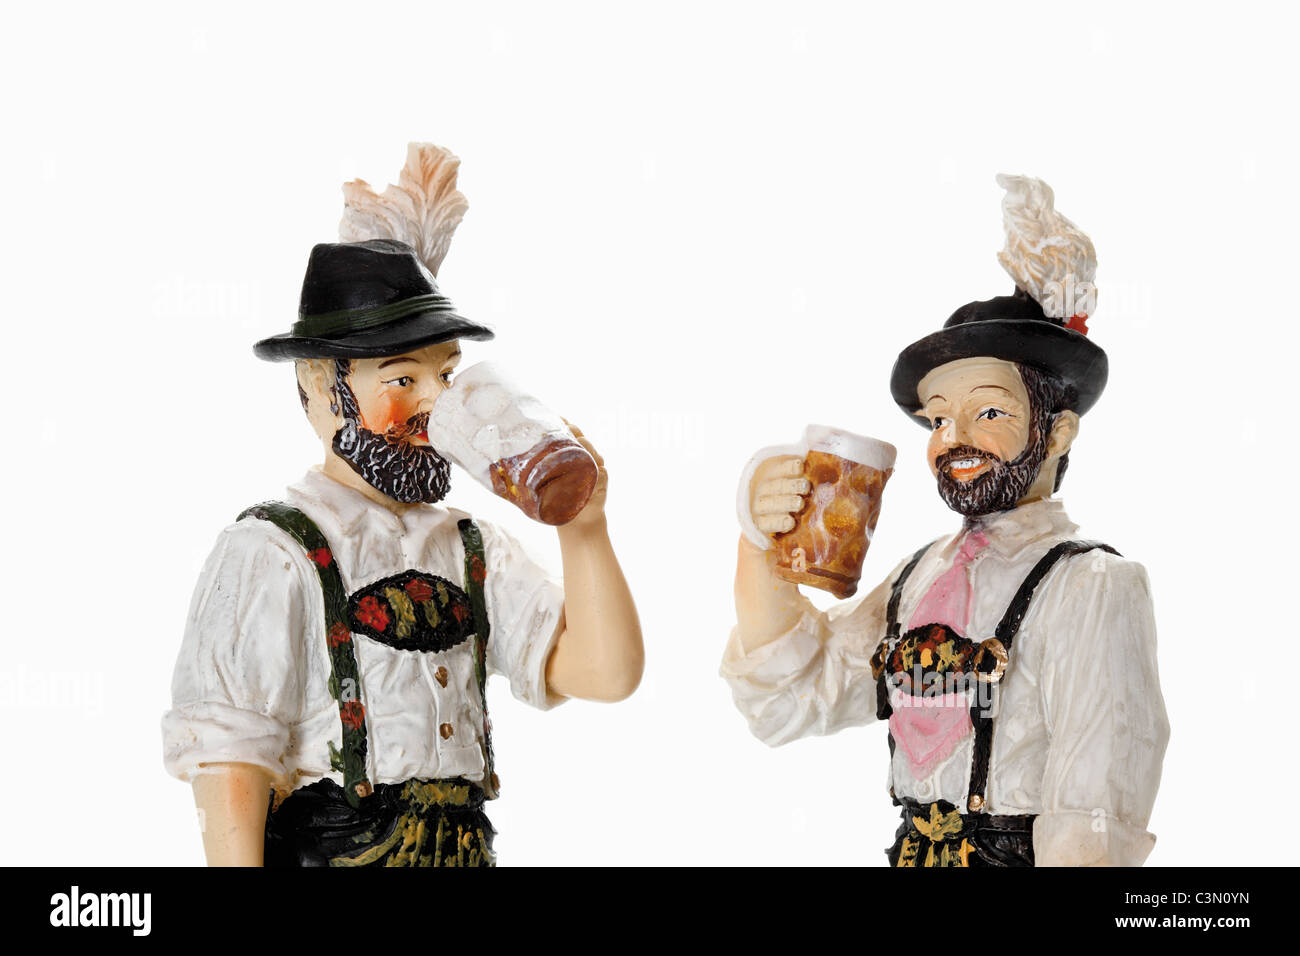 Bavarian figurines drinking beer from beer stein Stock Photo